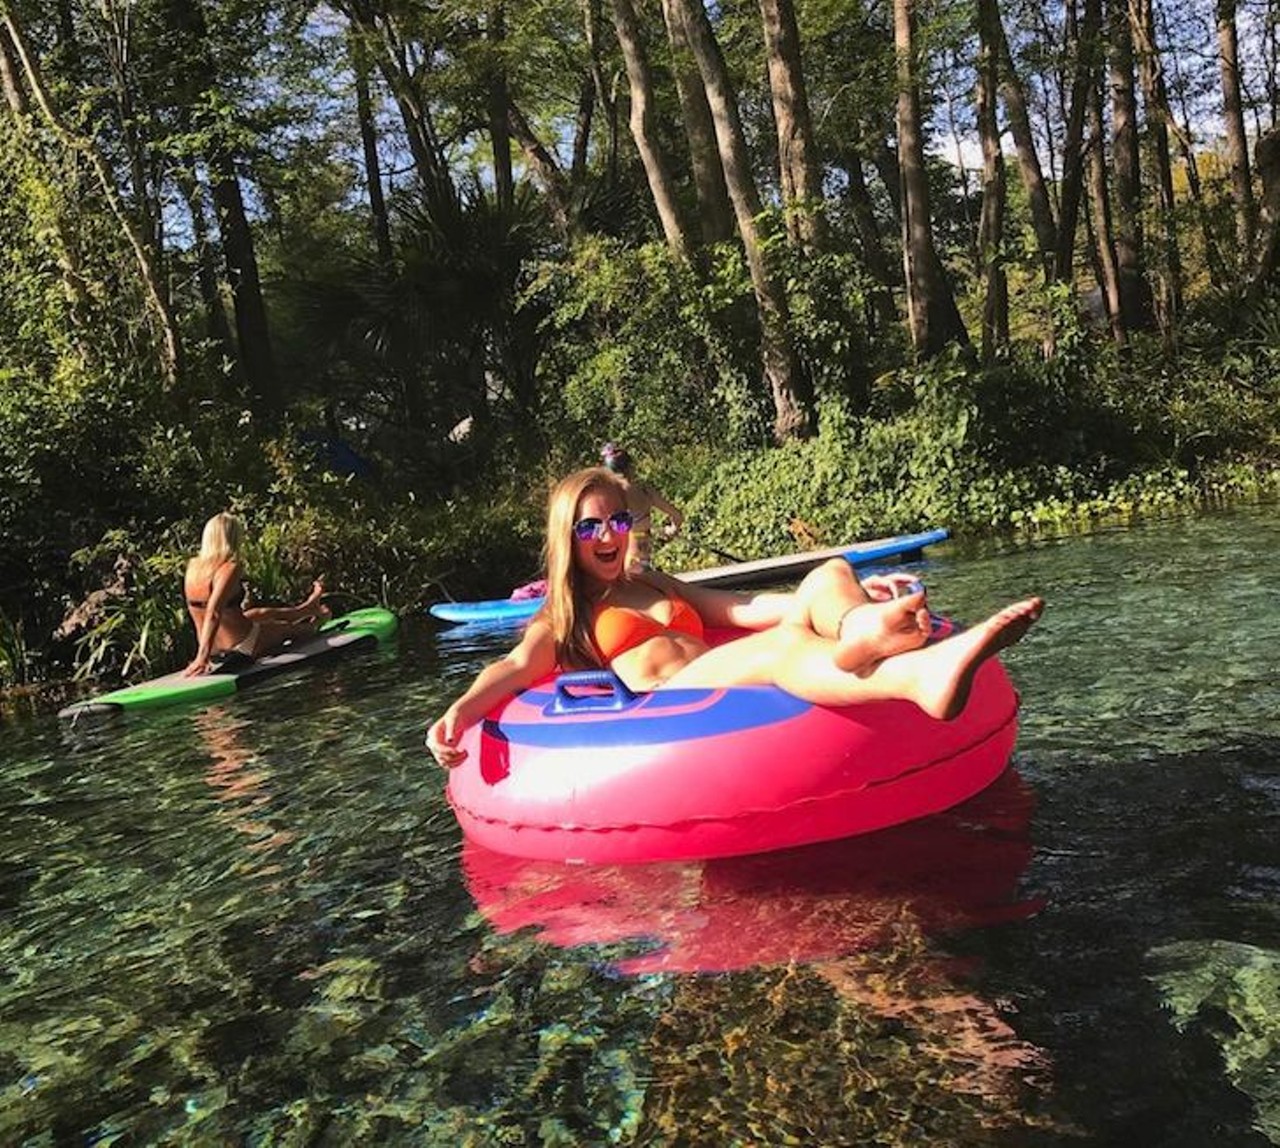 Ginnie Springs
5000 NE 60th Ave., High Springs, 386-454-7188
Distance: About 2 hours from Orlando
Photo via minicornfed/Instagram